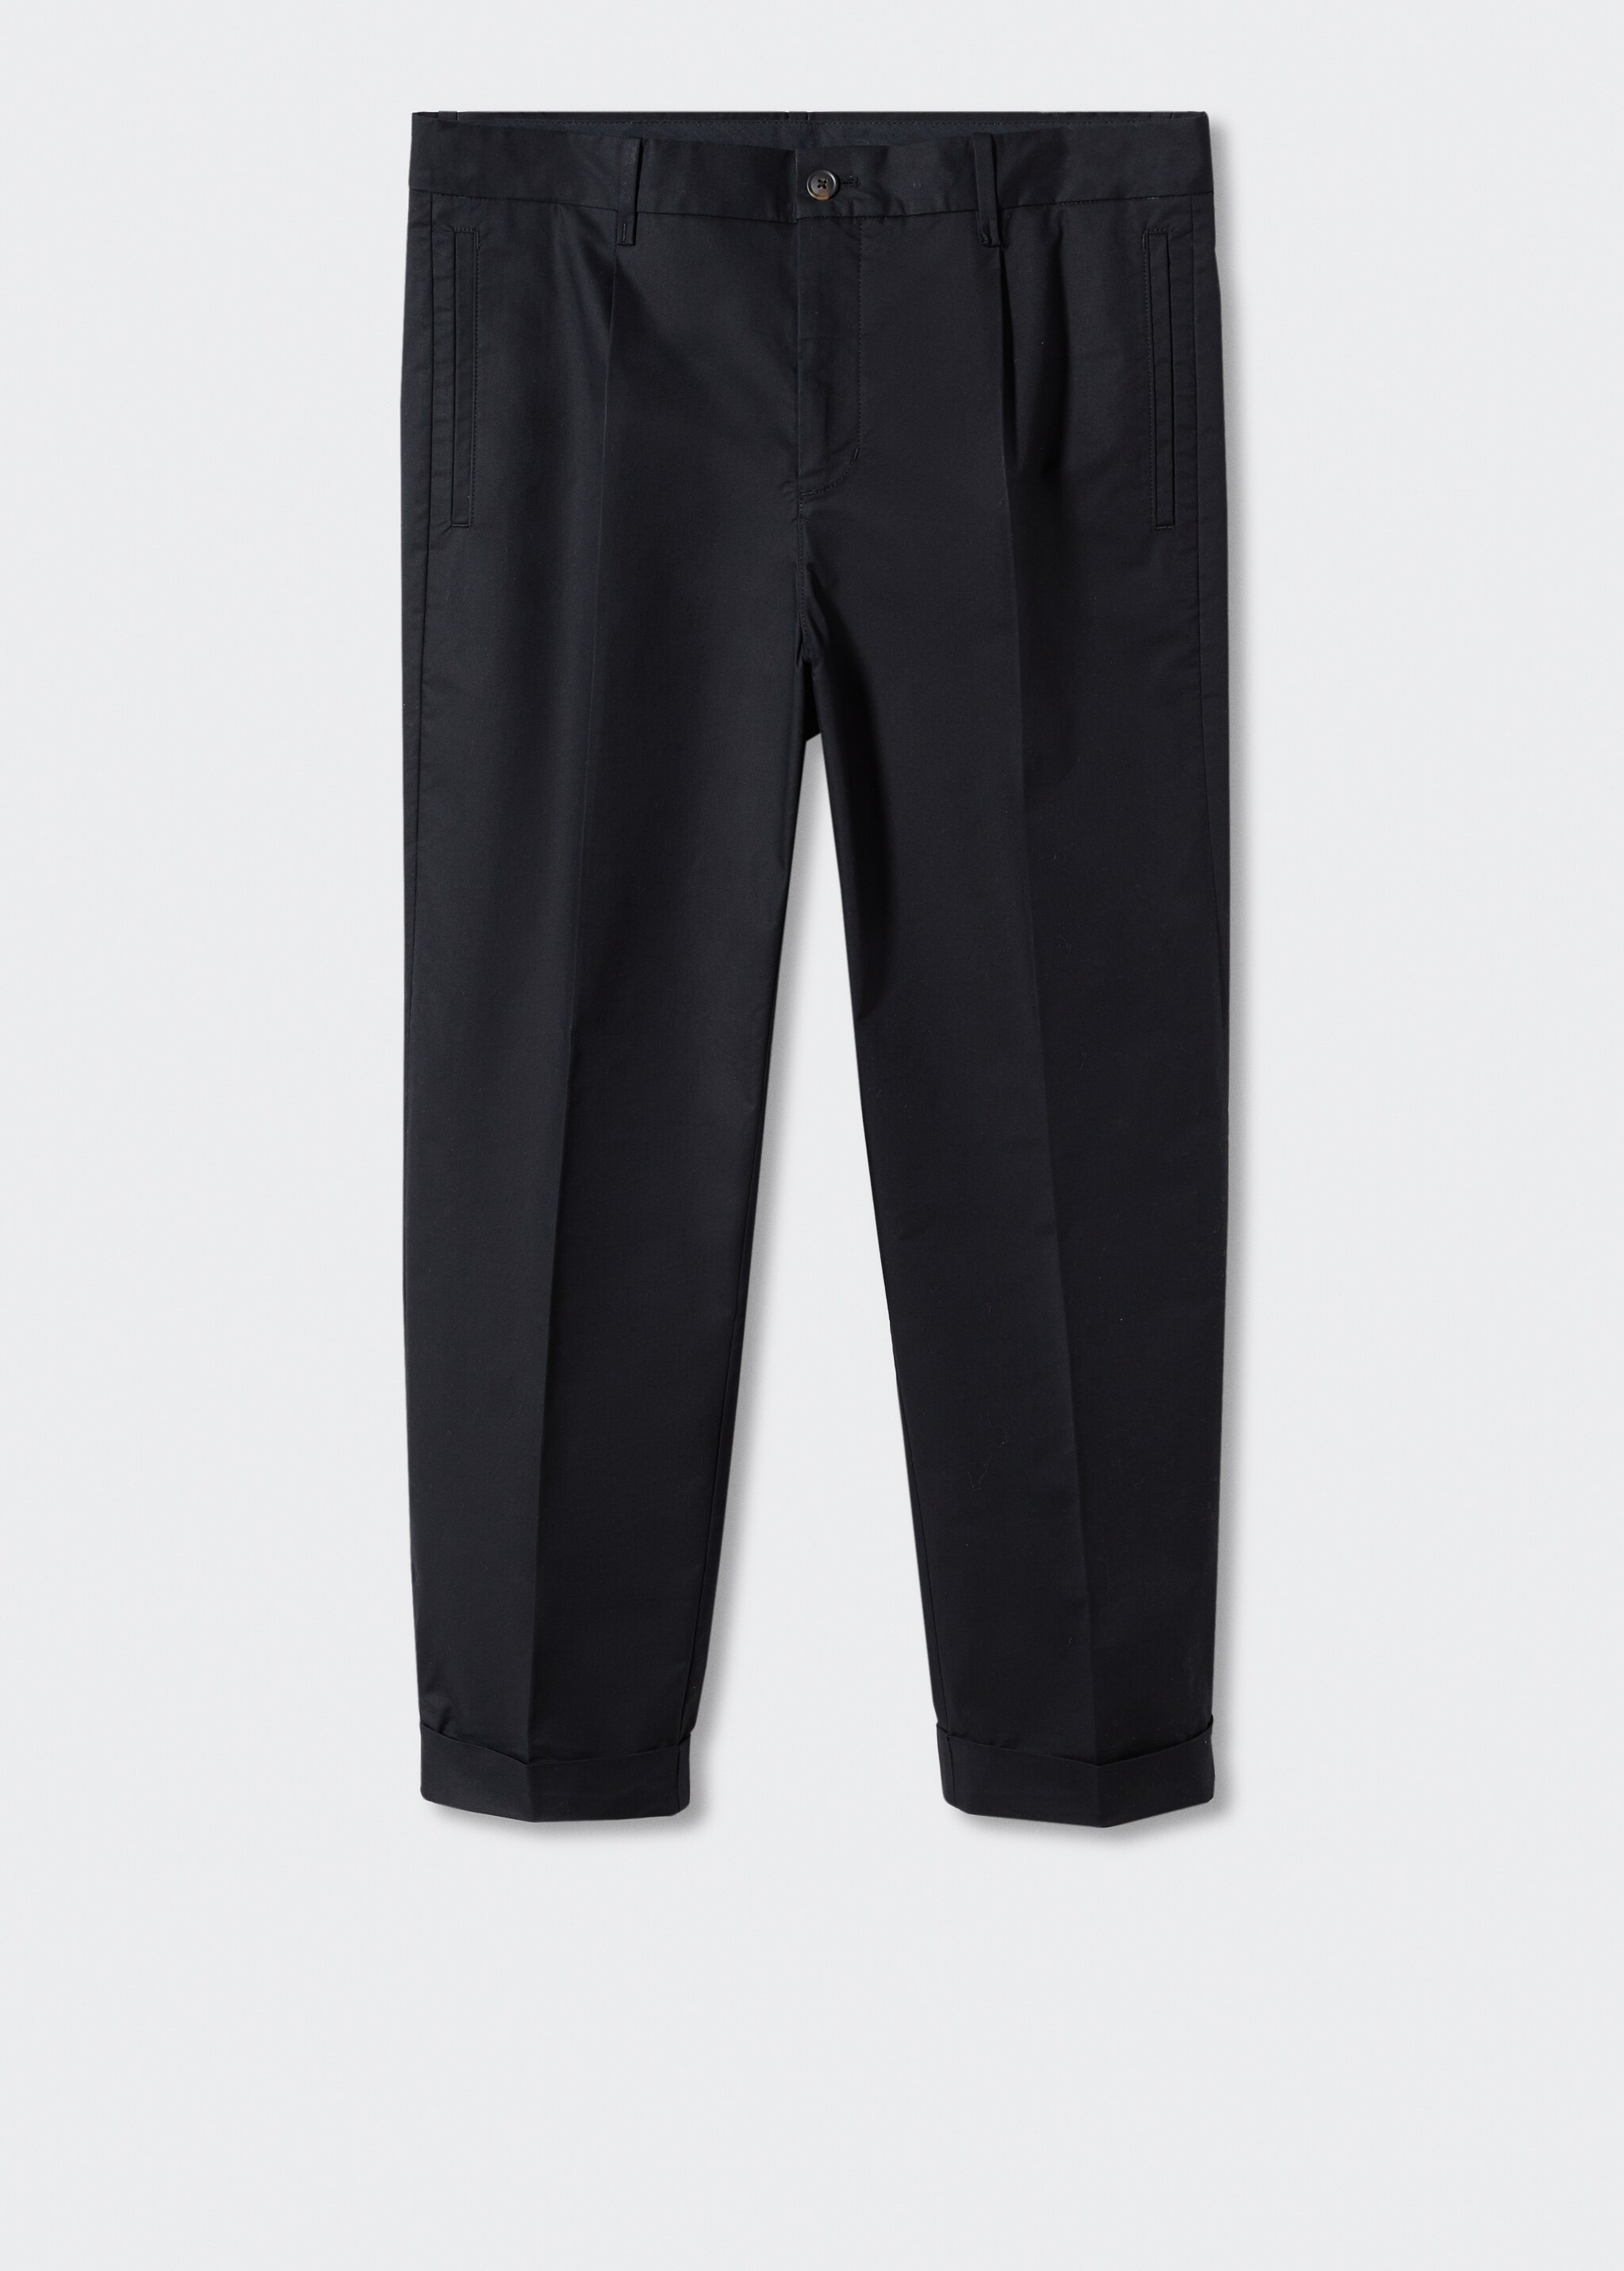 Cotton pleated trousers - Article without model